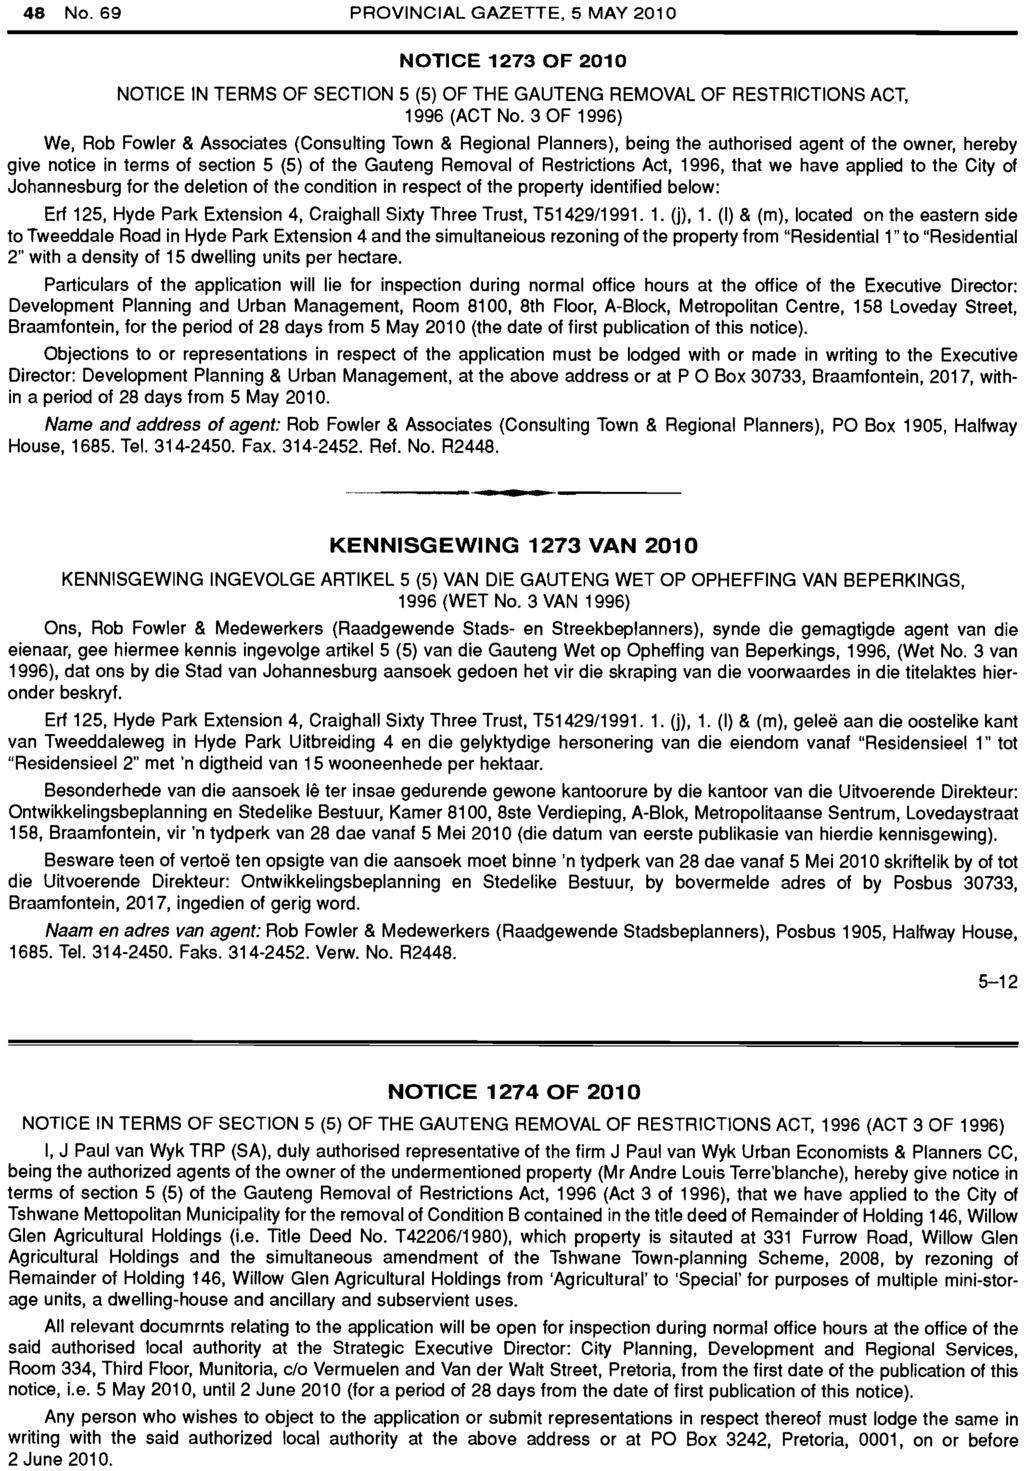 48 No. 69 PROVINCIAL GAZETTE, 5 MAY 2010 NOTICE 1273 OF 2010 NOTICE IN TERMS OF SECTION 5 (5) OF THE GAUTENG REMOVAL OF RESTRICTIONS ACT, 1996 (ACT No.